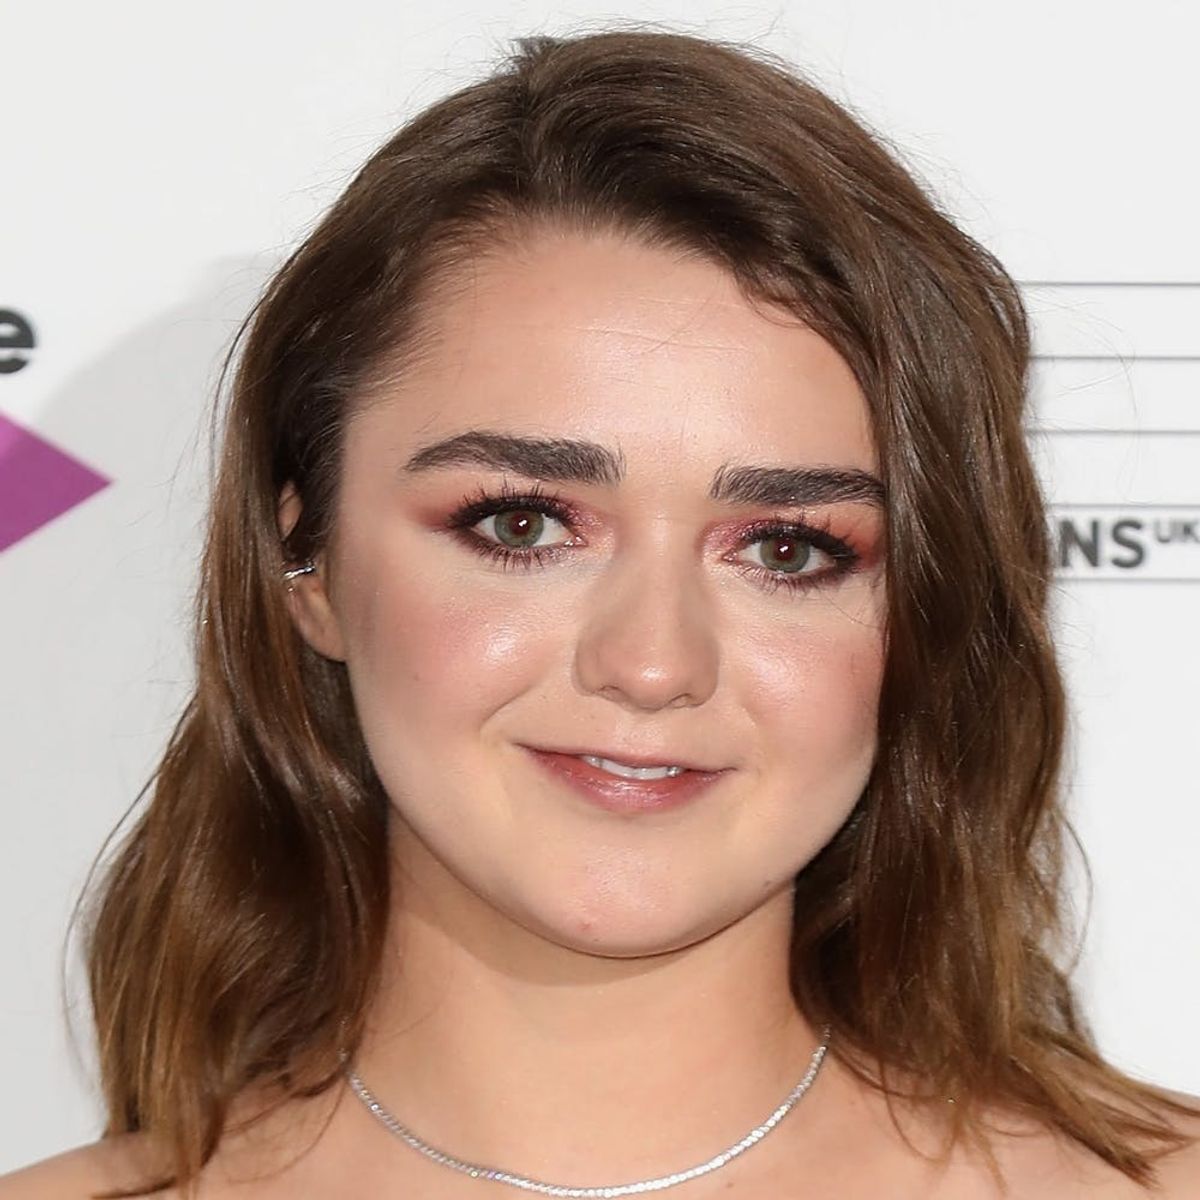 Maisie Williams’ Boyfriend Does Her Makeup for Red Carpet Appearance